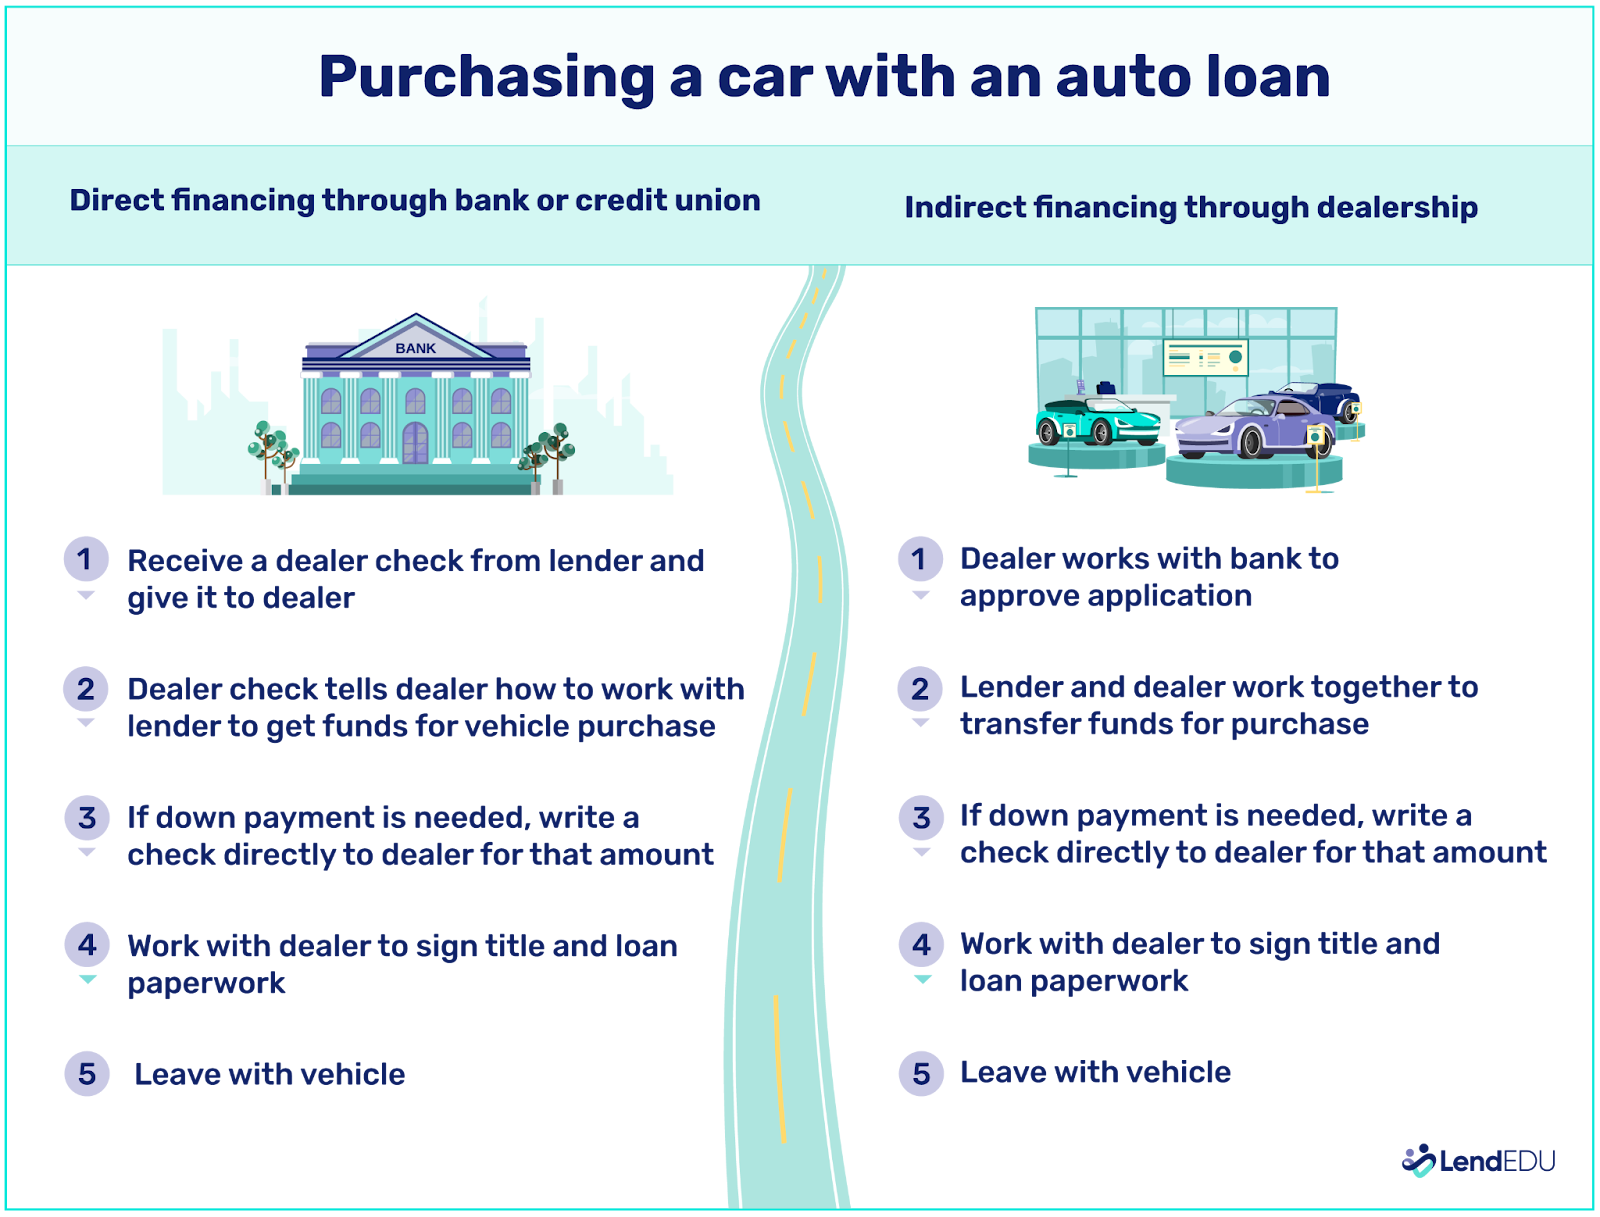 The processes of financing financing through a bank or credit union side by side with financing through a dealership. 